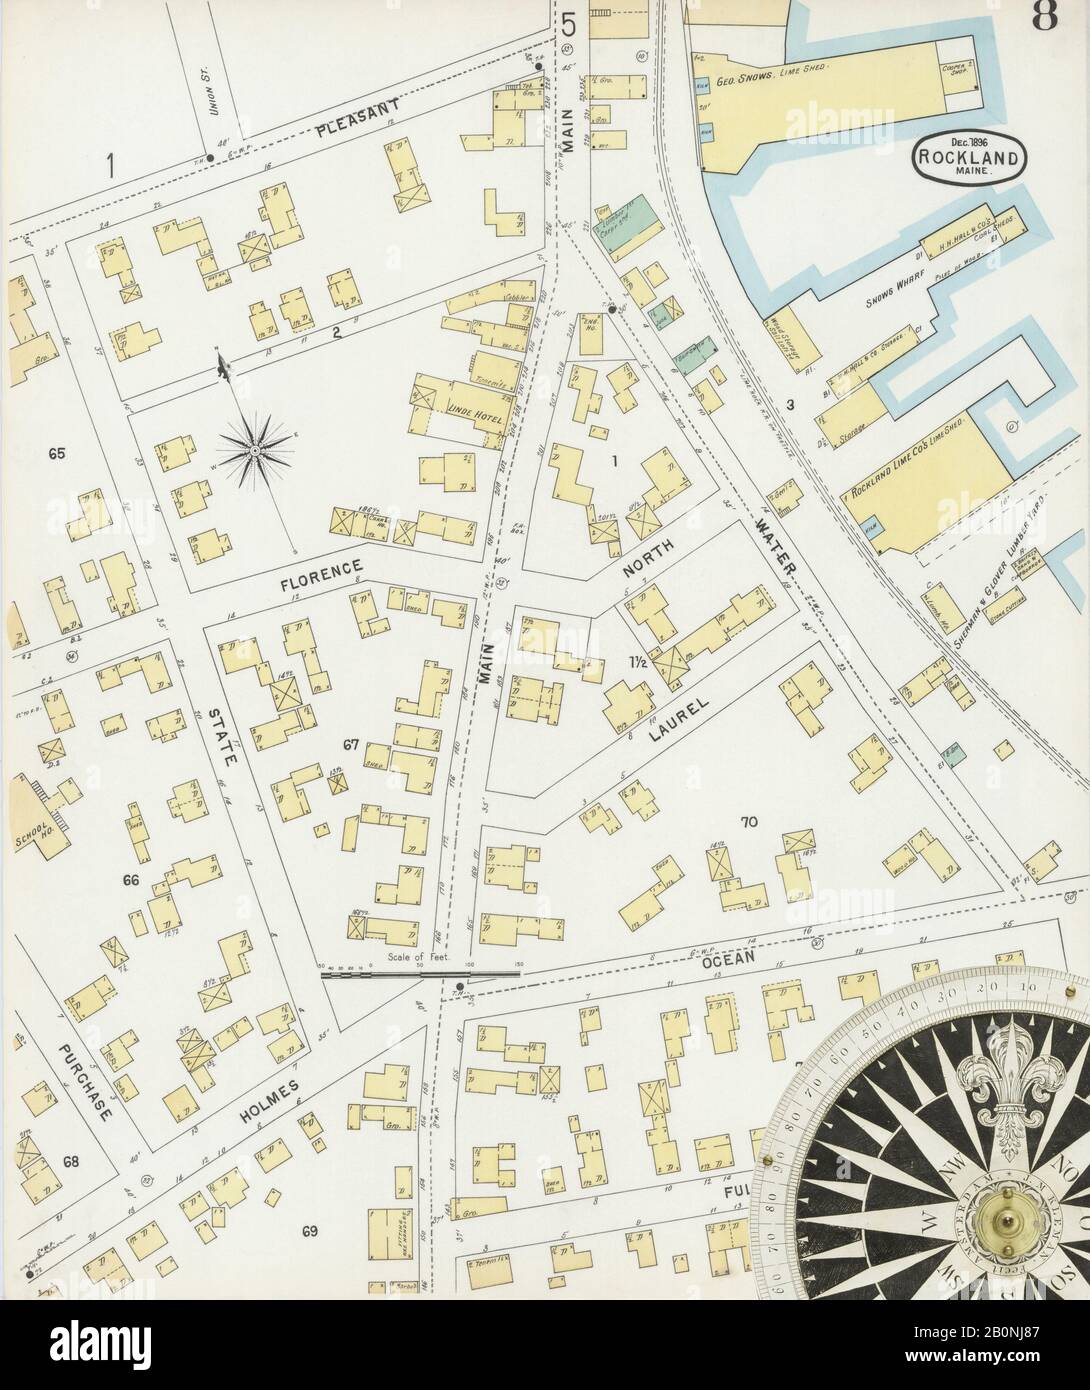 Image 8 of Sanborn Fire Insurance Map from Rockland, Knox County, Maine. Dec 1896. 9 Sheet(s), America, street map with a Nineteenth Century compass Stock Photo